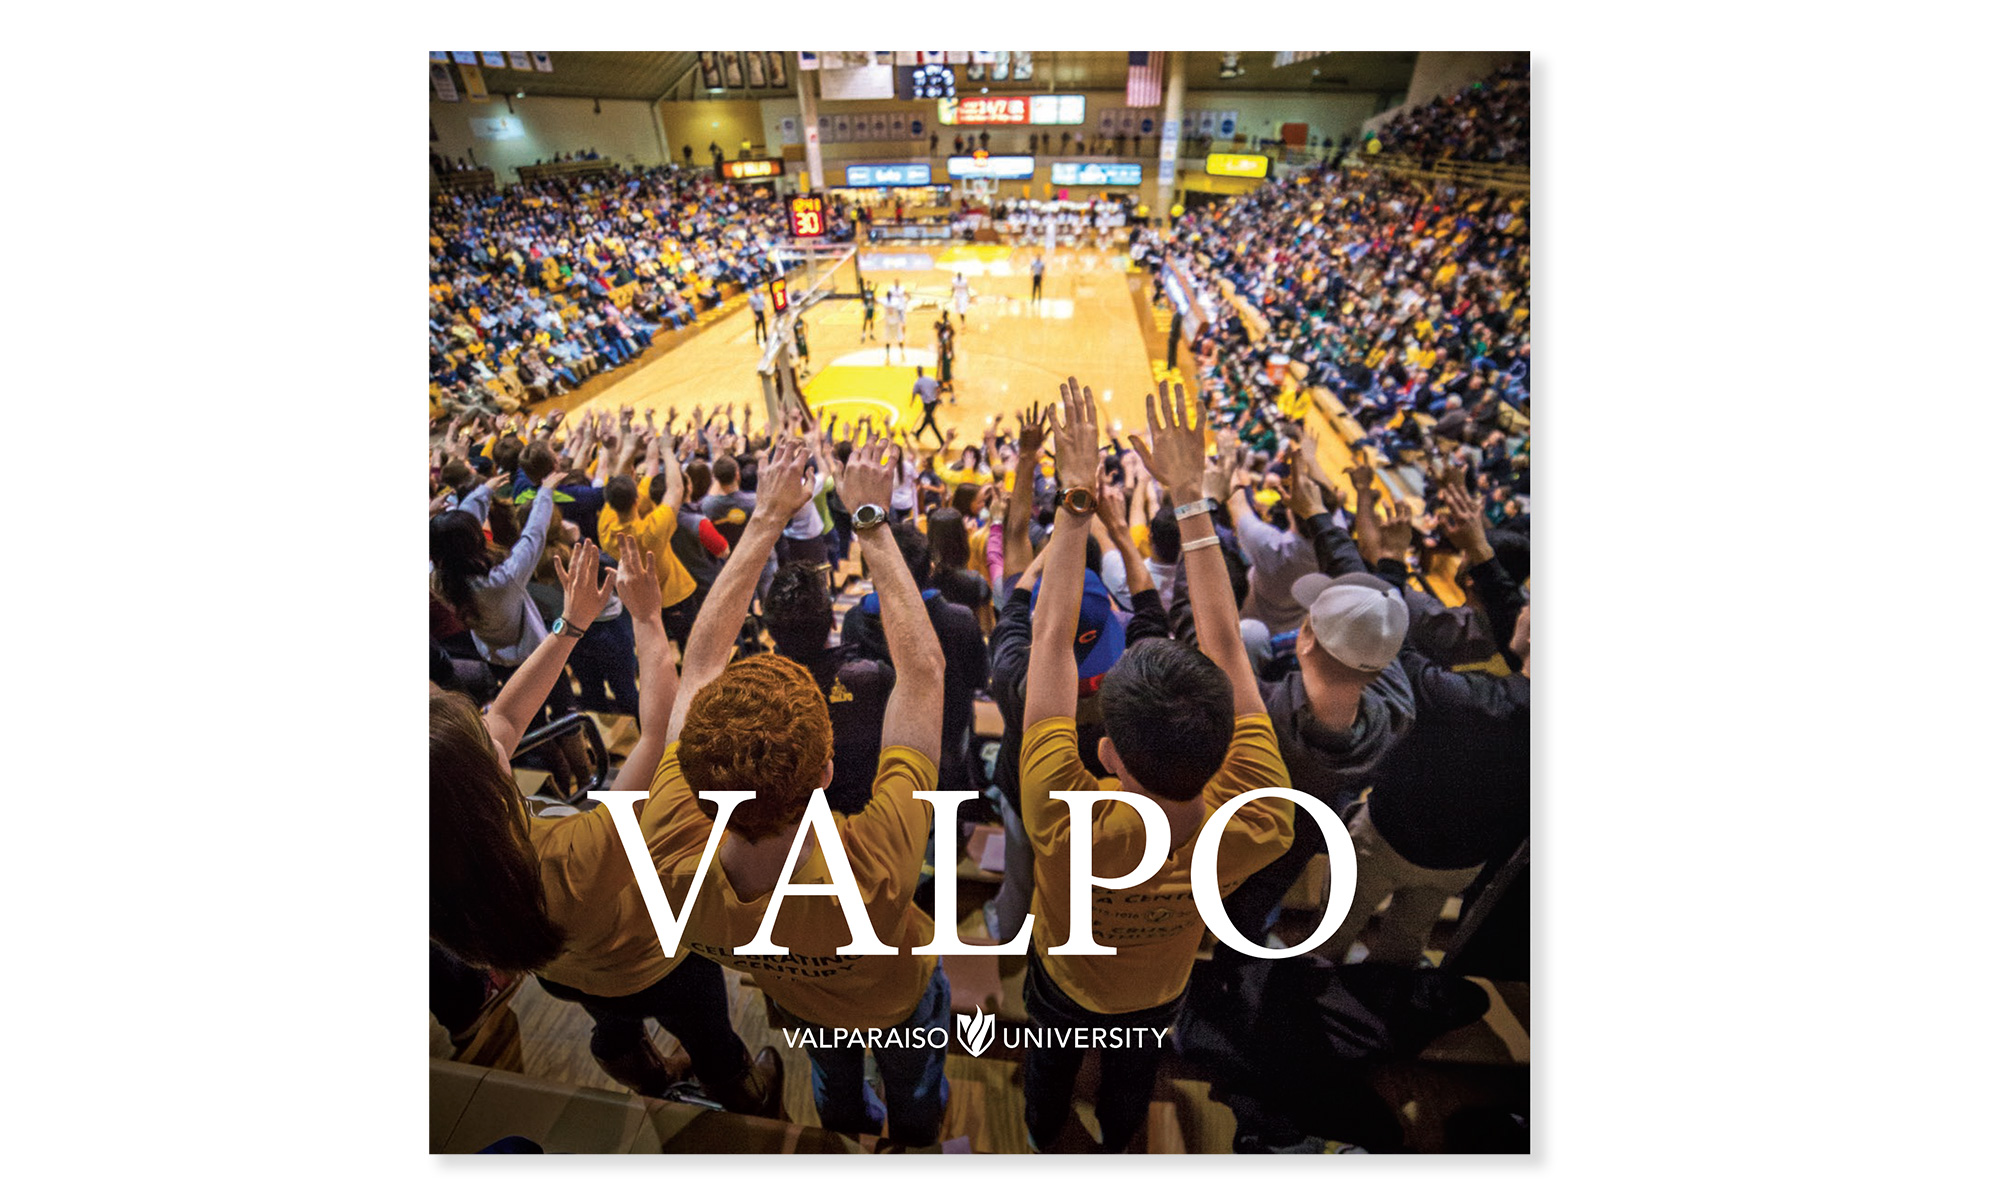 Brochure cover showing crowd at a basketball game.